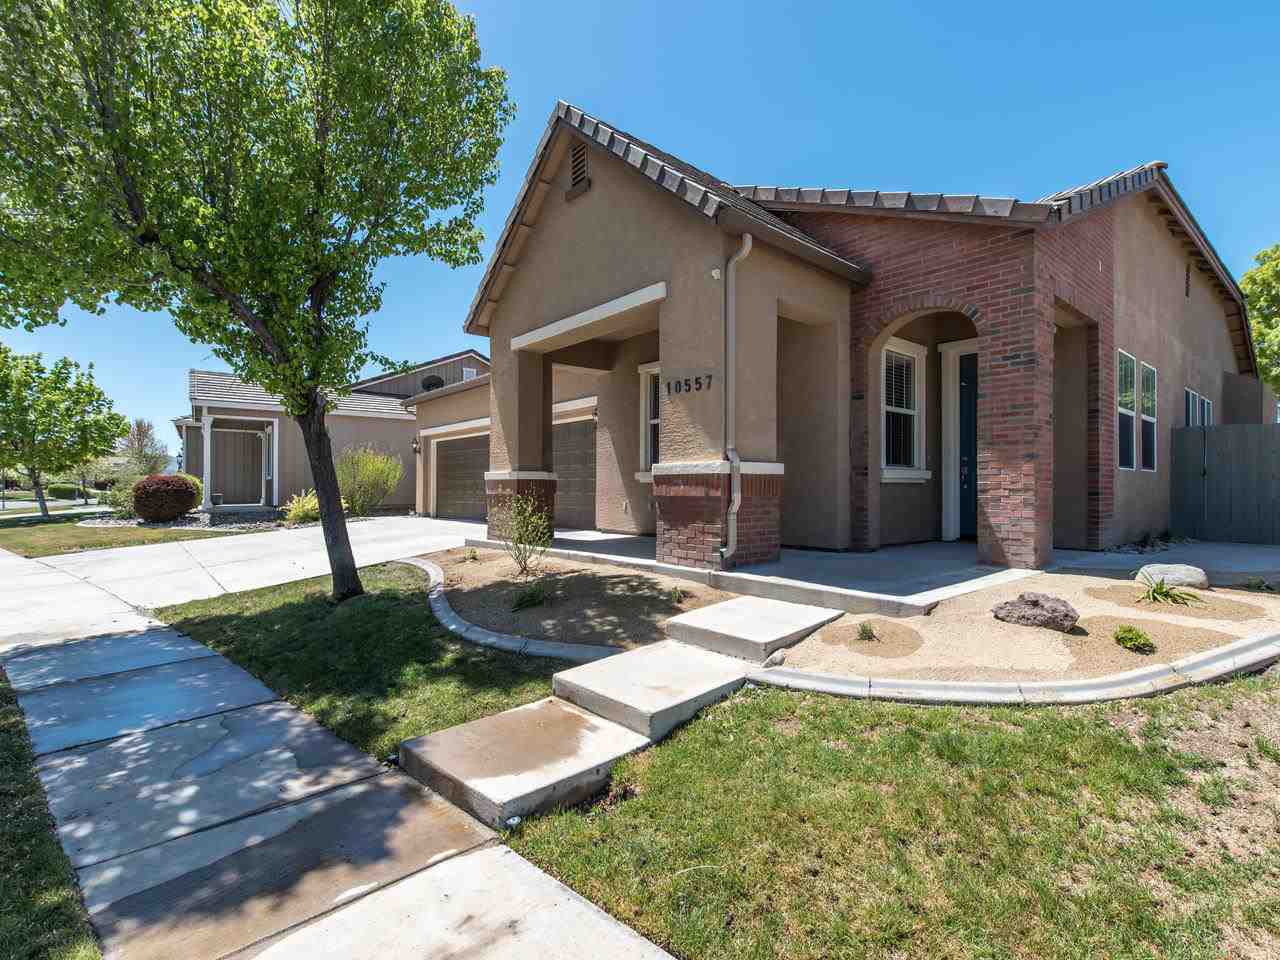 Property Photo:  10557 French Meadows  NV 89521-4152 